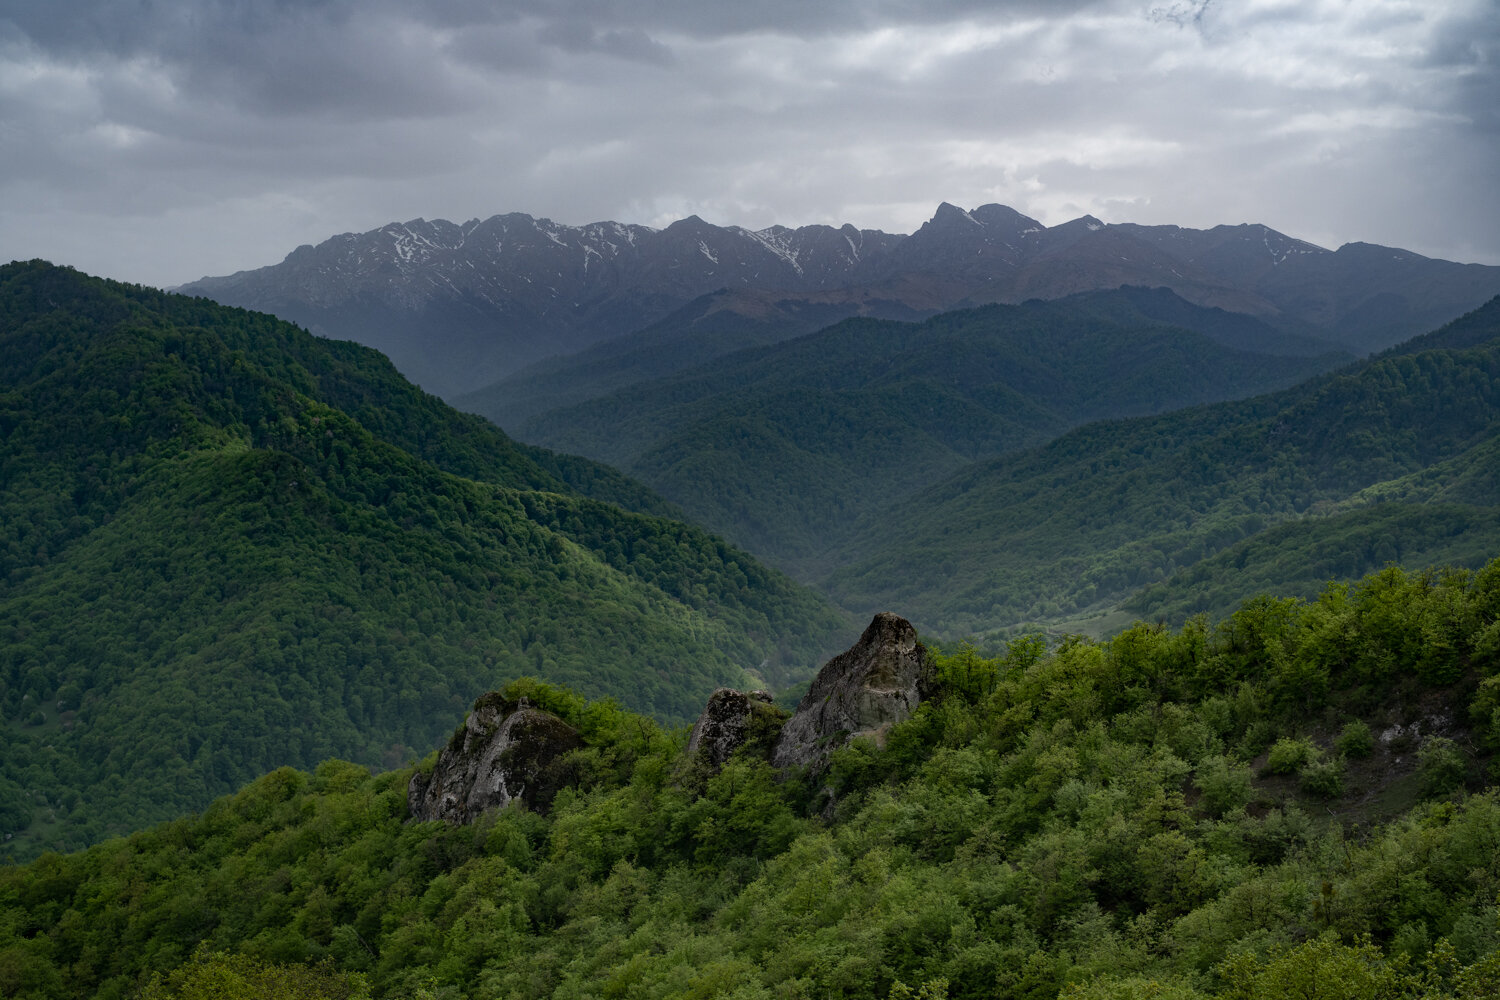 The view from Gandzasar monastery